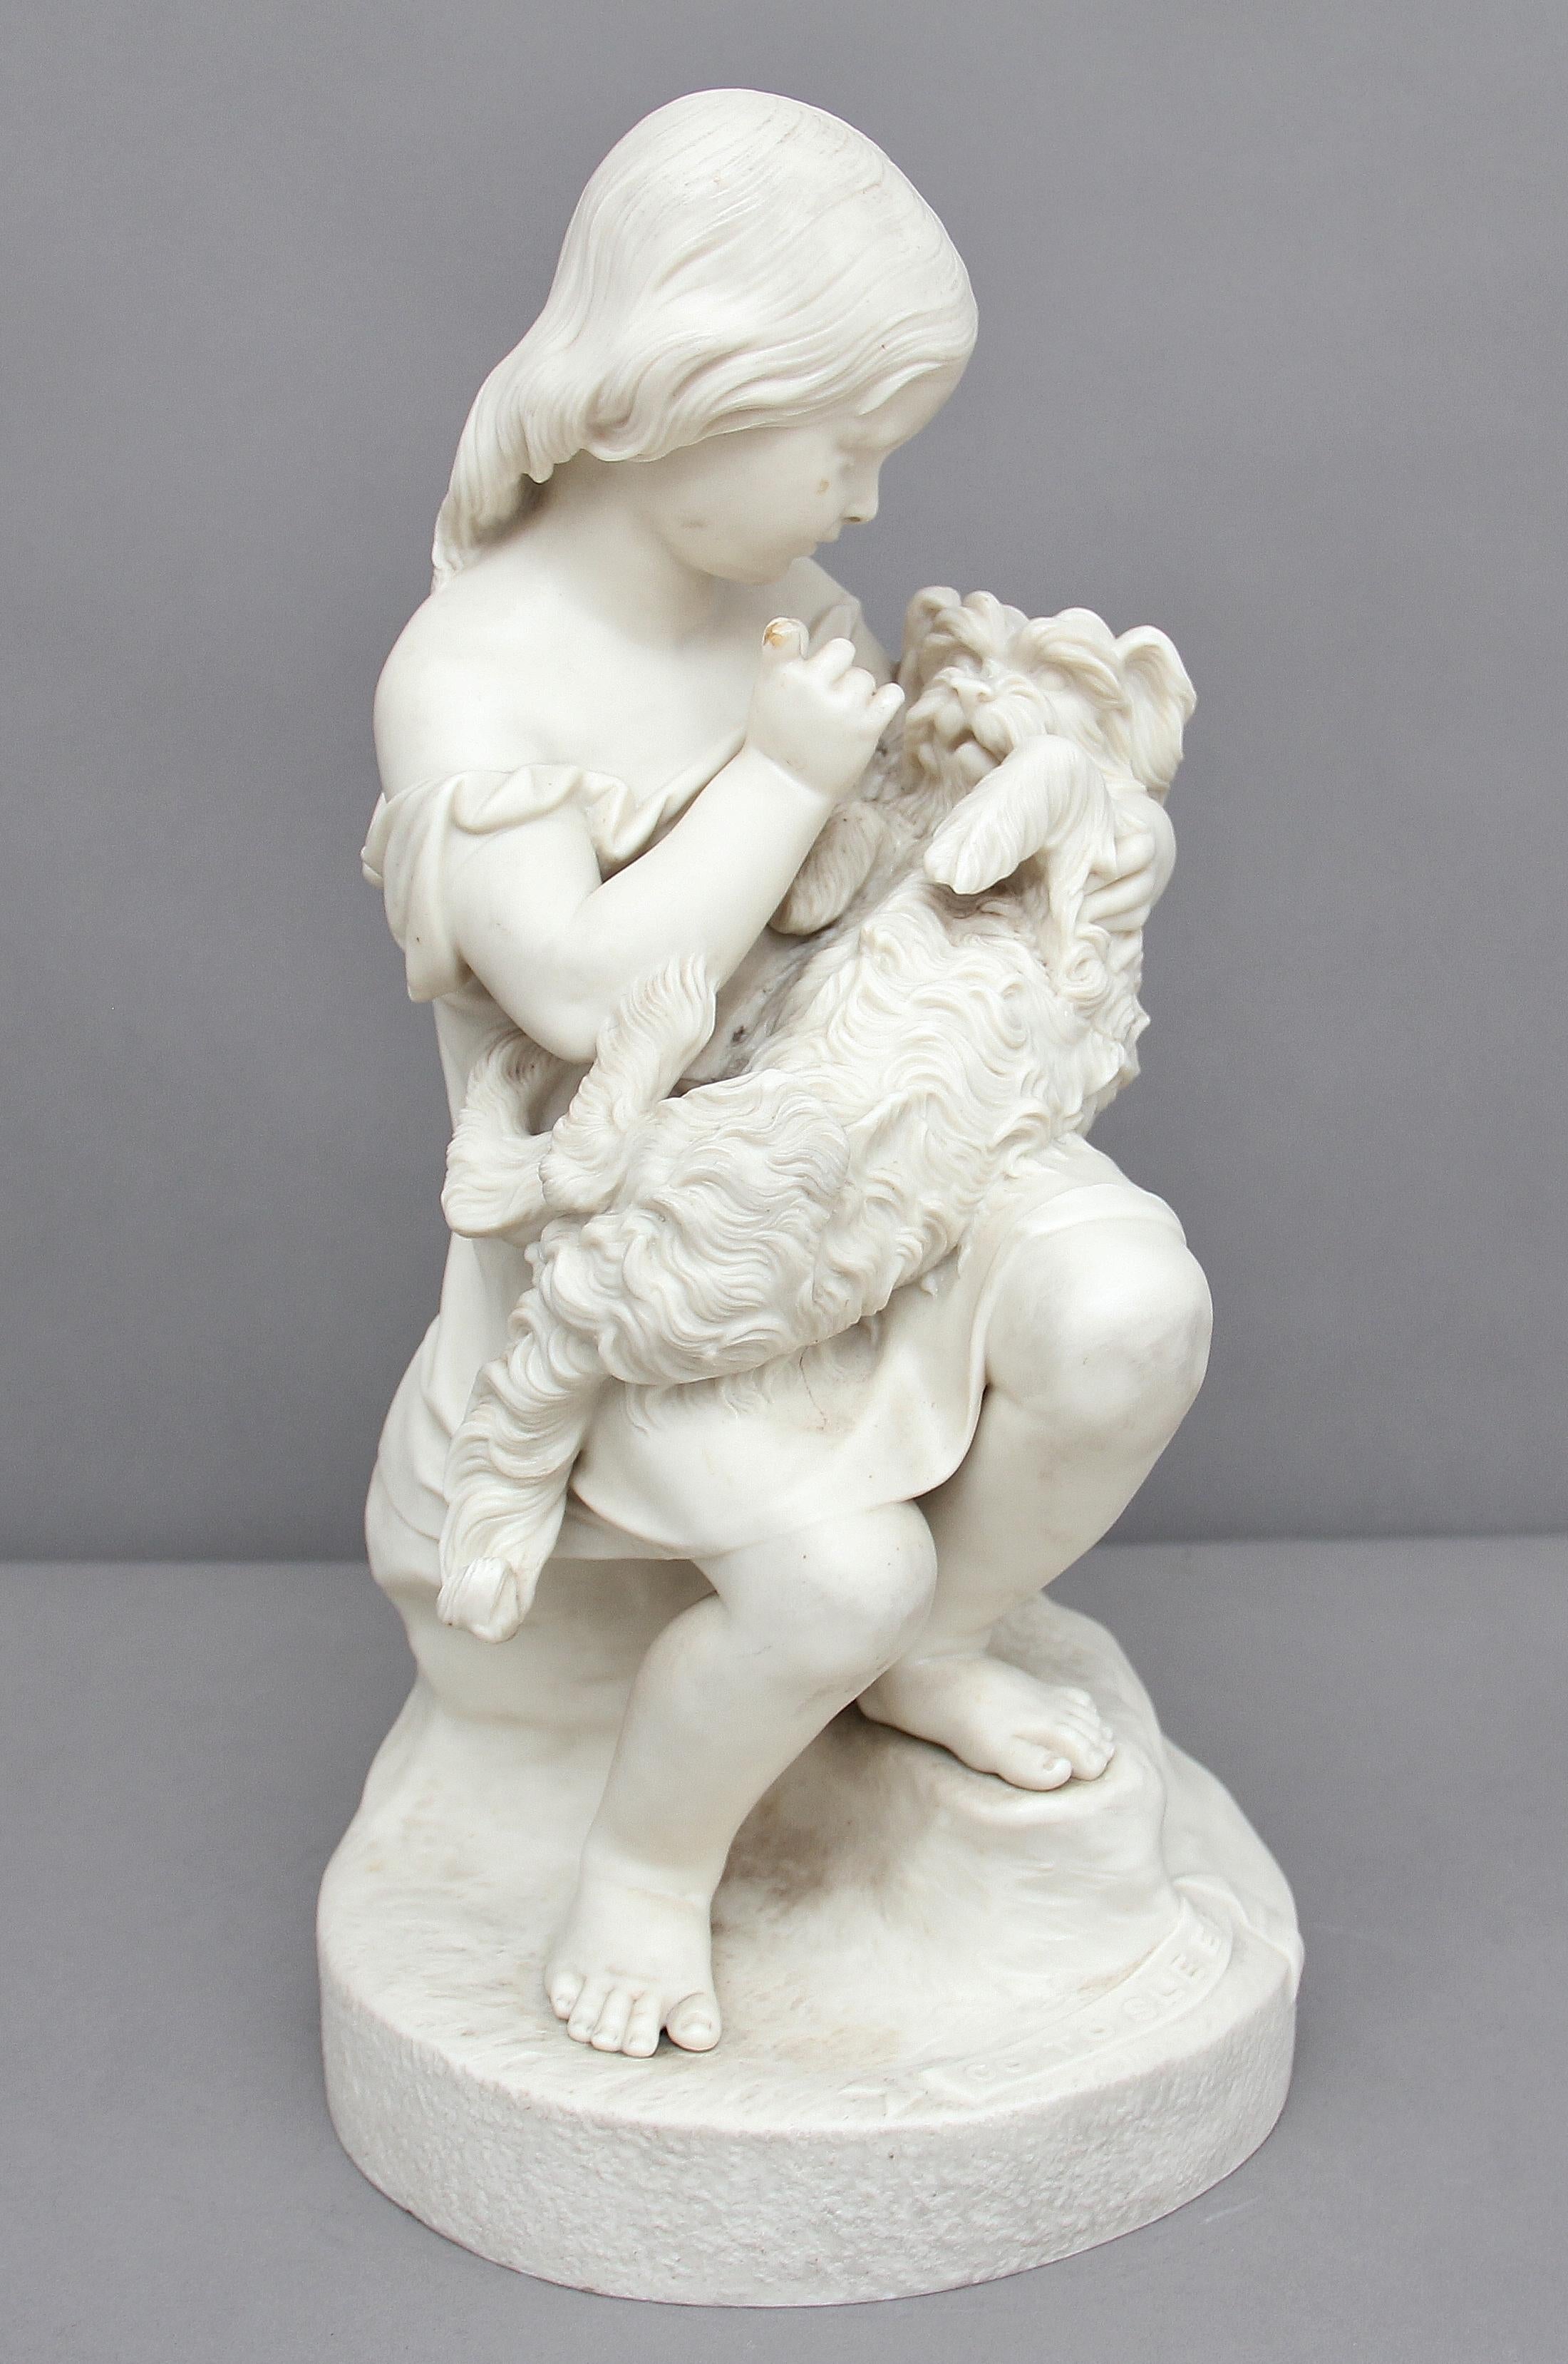 19th century Copeland parian figure group “Go to sleep” after J Durham, published by the Art Union of London, of a girl holding a dog. Some slight damage on the base and the girls finger, circa 1860.

   